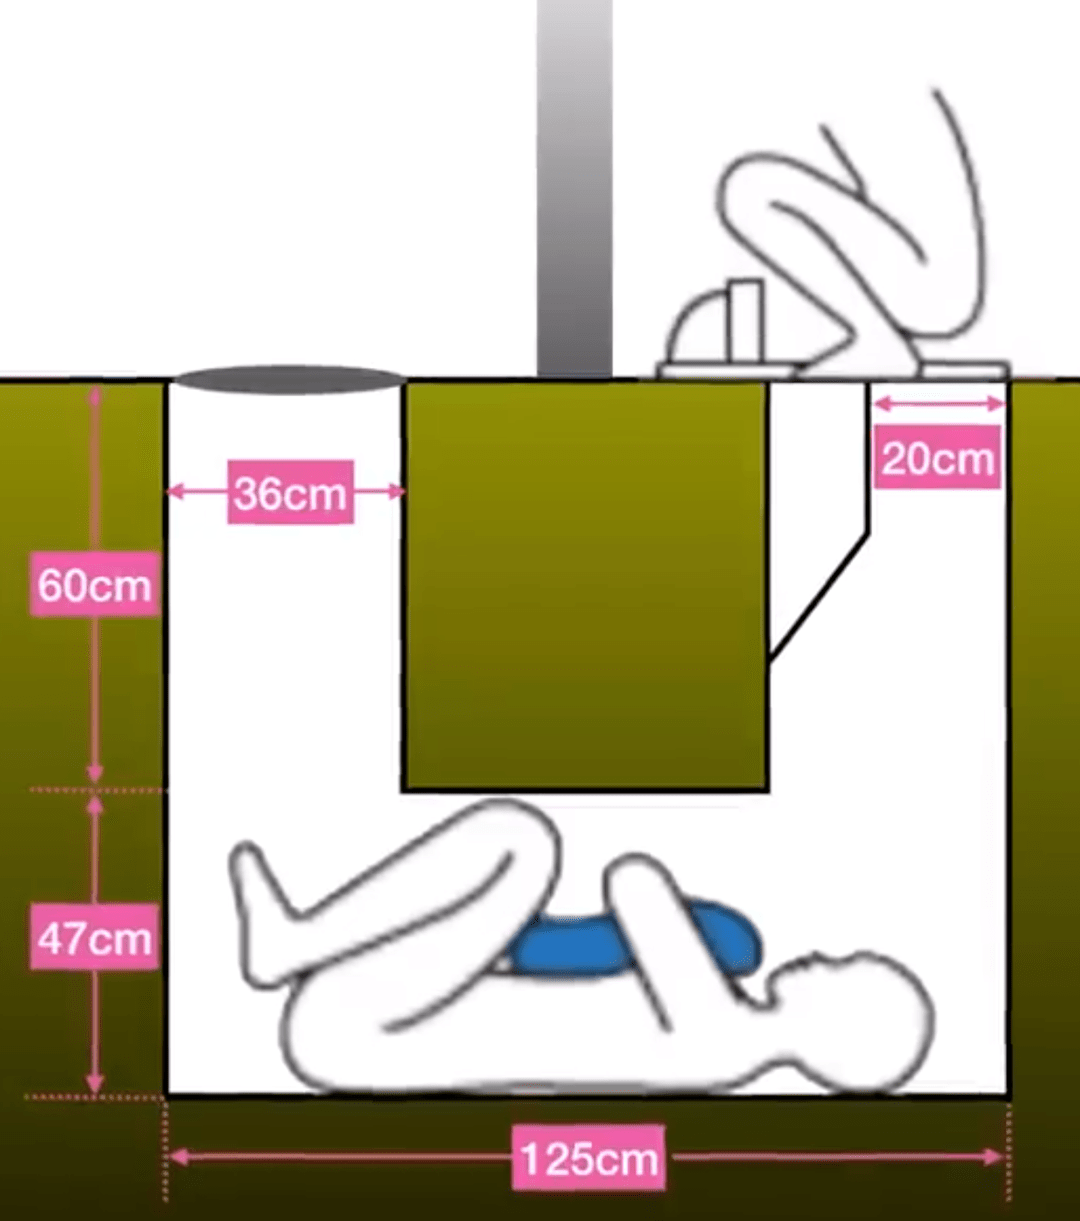 unsolved mysteries in Japan - septic tank diagram